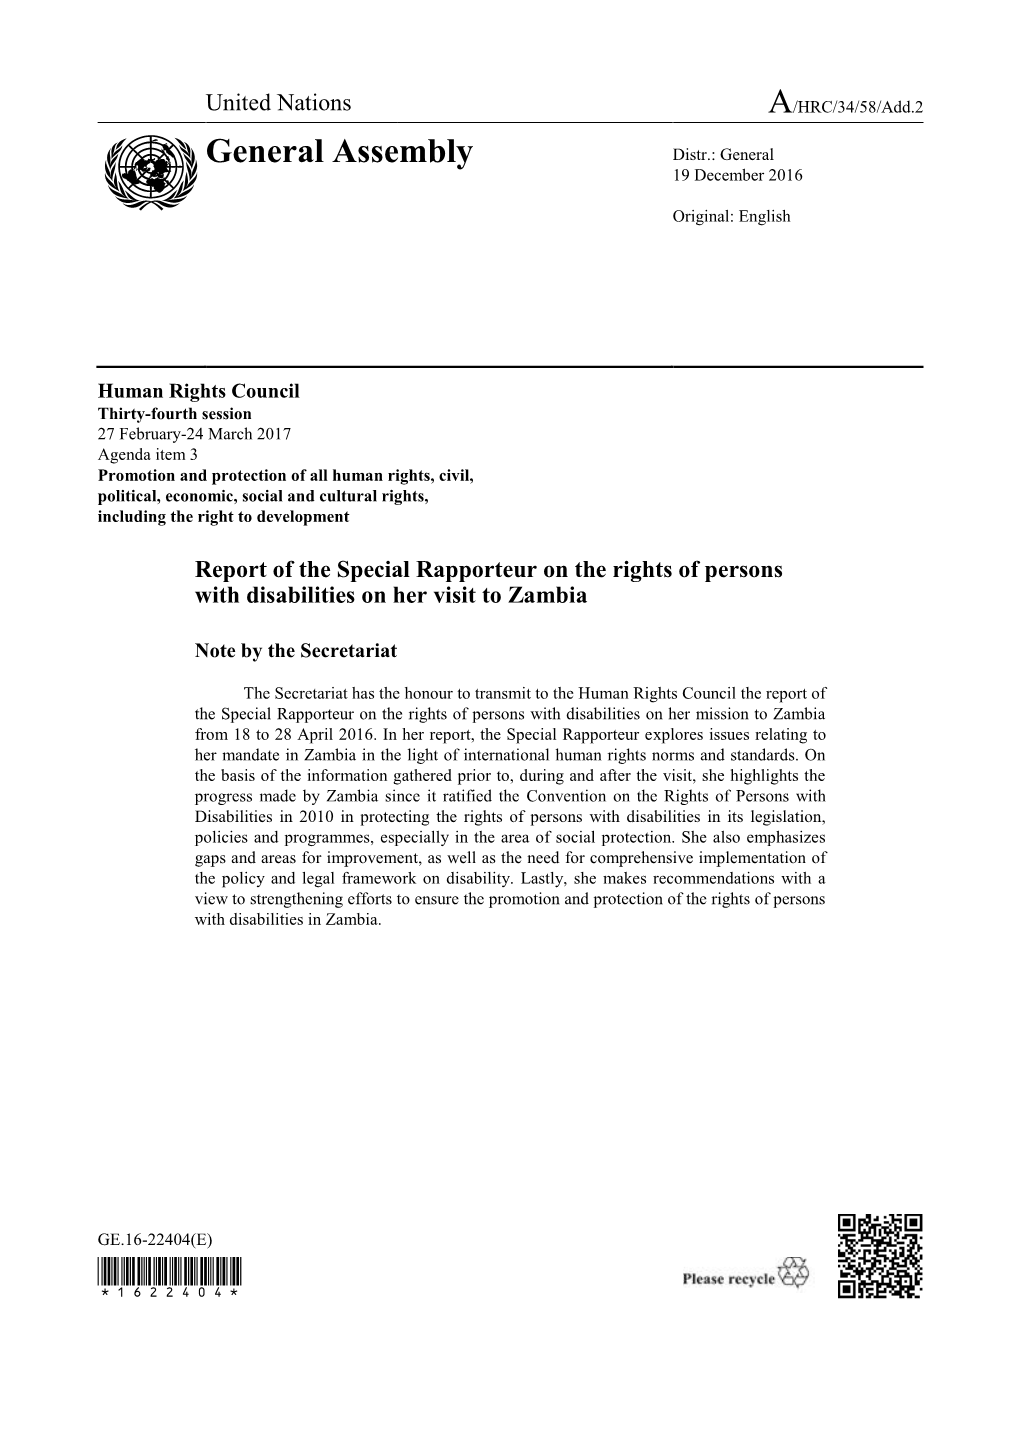 Report of the Special Rapporteur on the Rights of Persons with Disabilities on Her Visit to Zambia